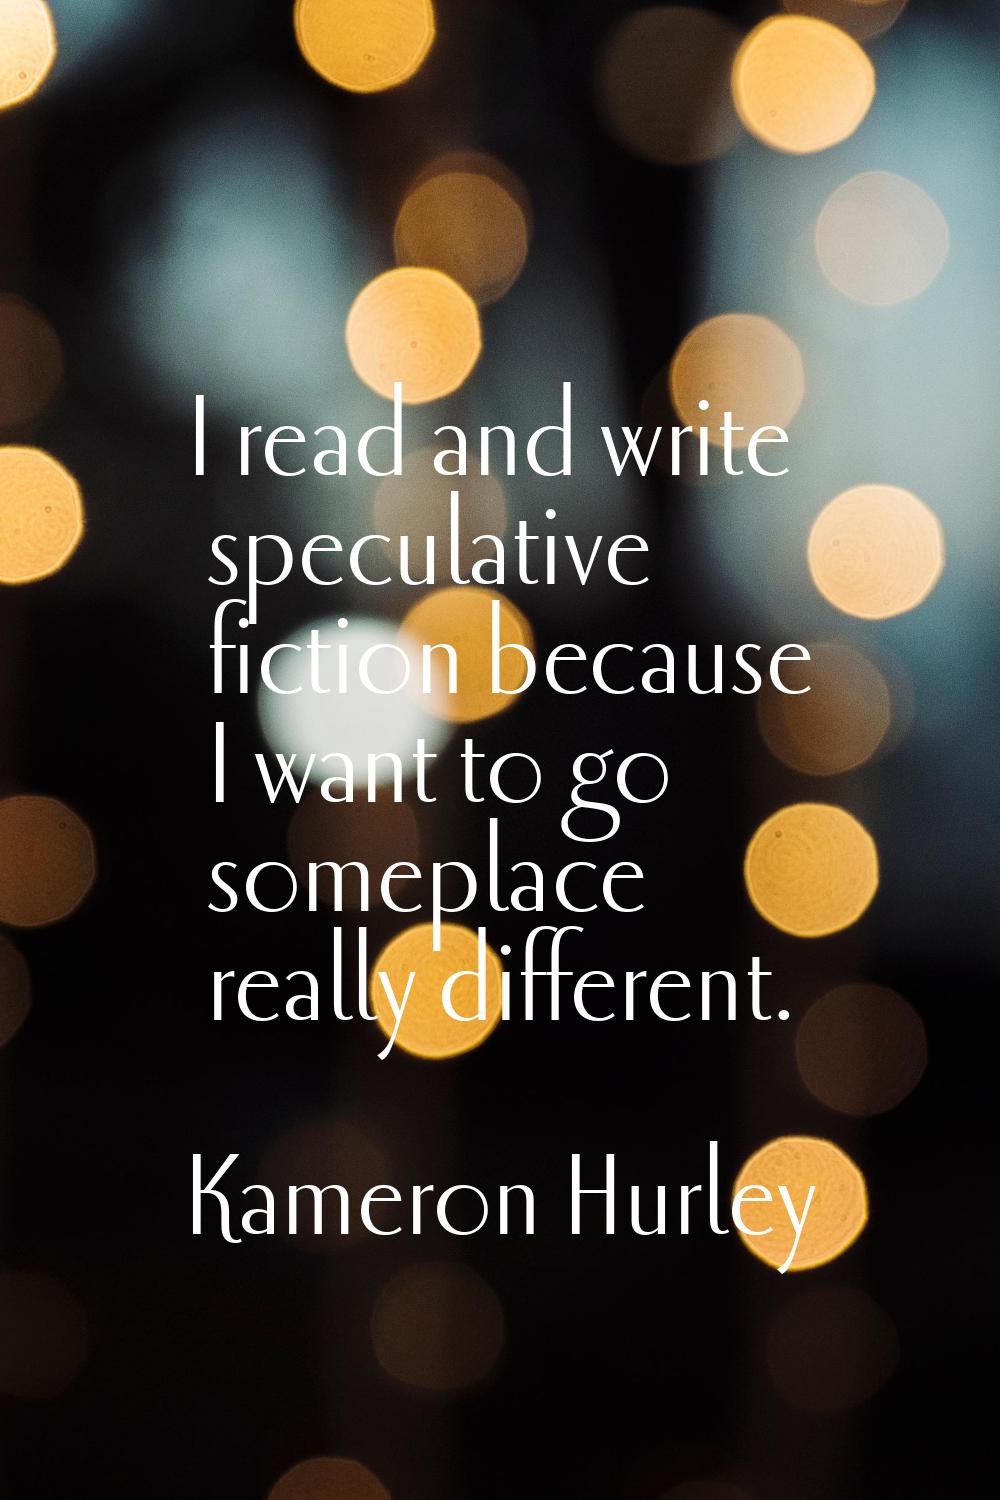 I read and write speculative fiction because I want to go someplace really different.